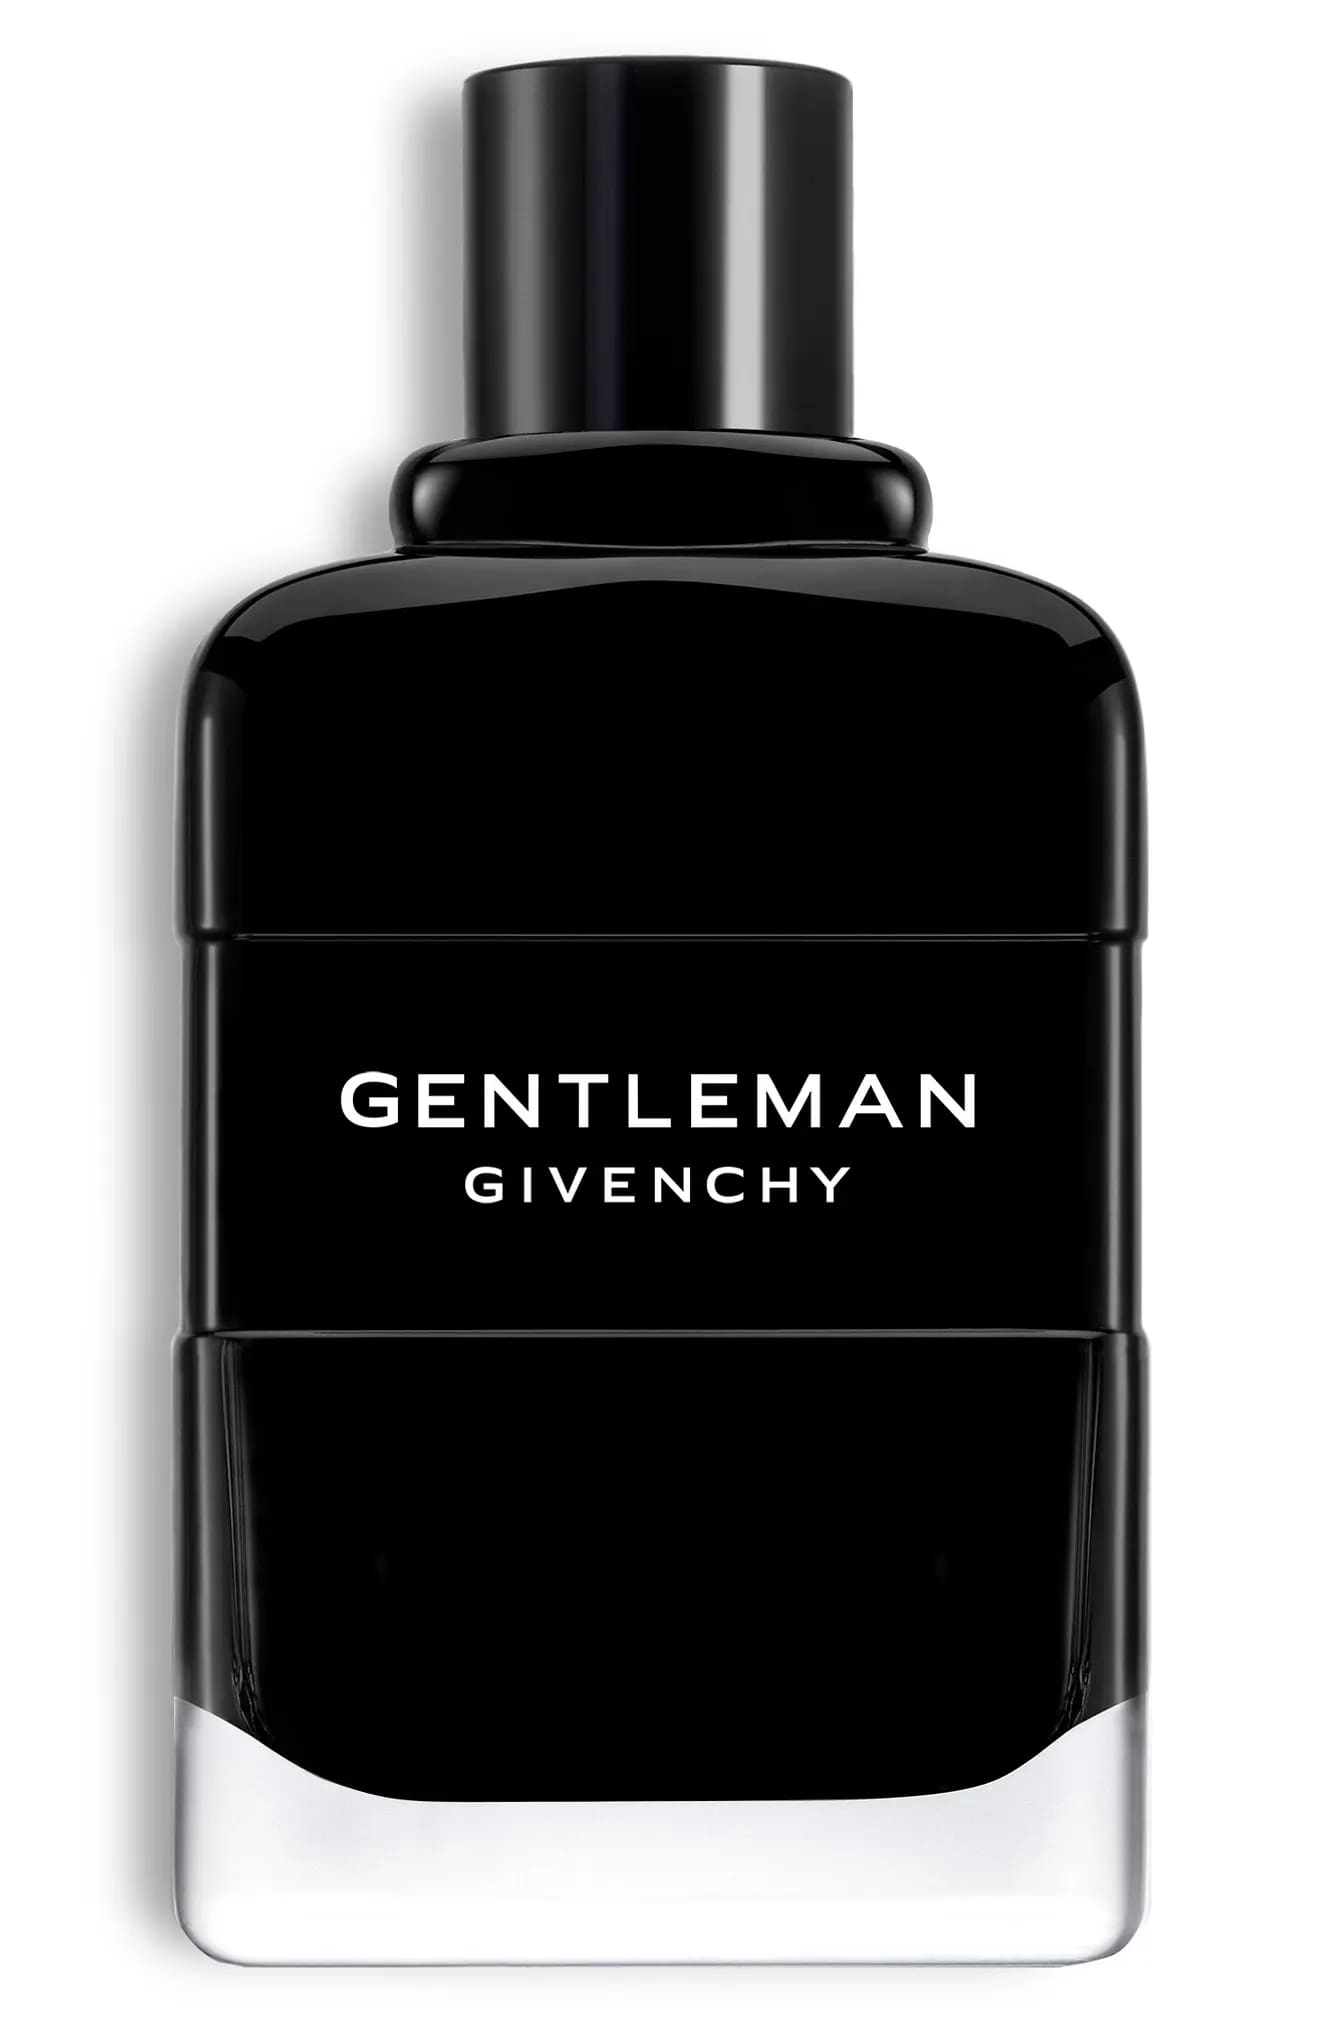 Gentleman EDP Spray Perfume for Men by Givenchy